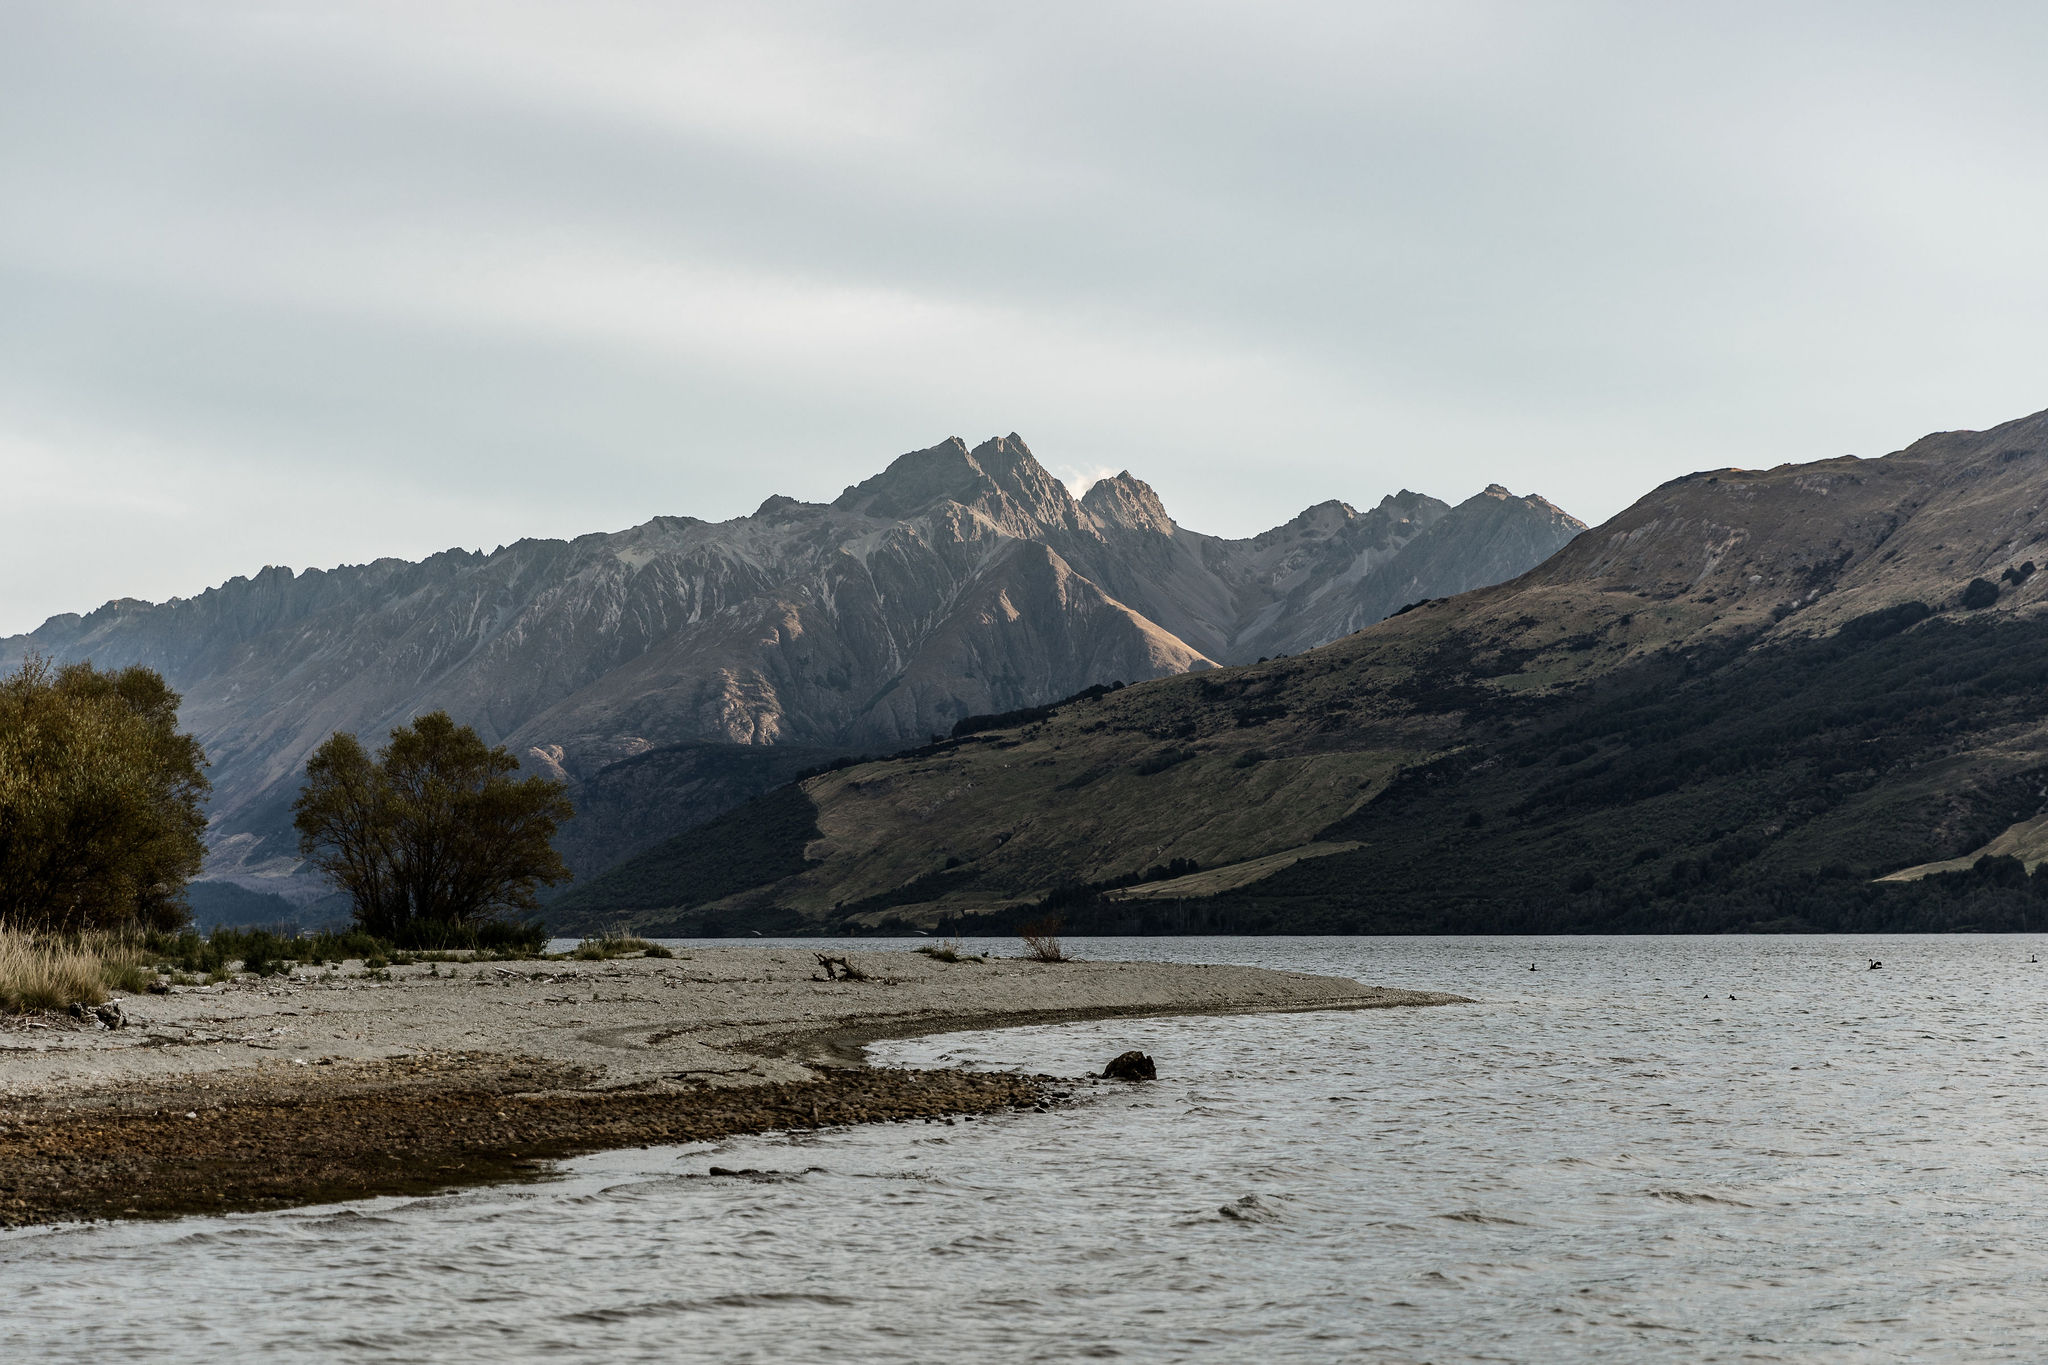 Head of the Lake Glenorchy - Susan Miller Photography